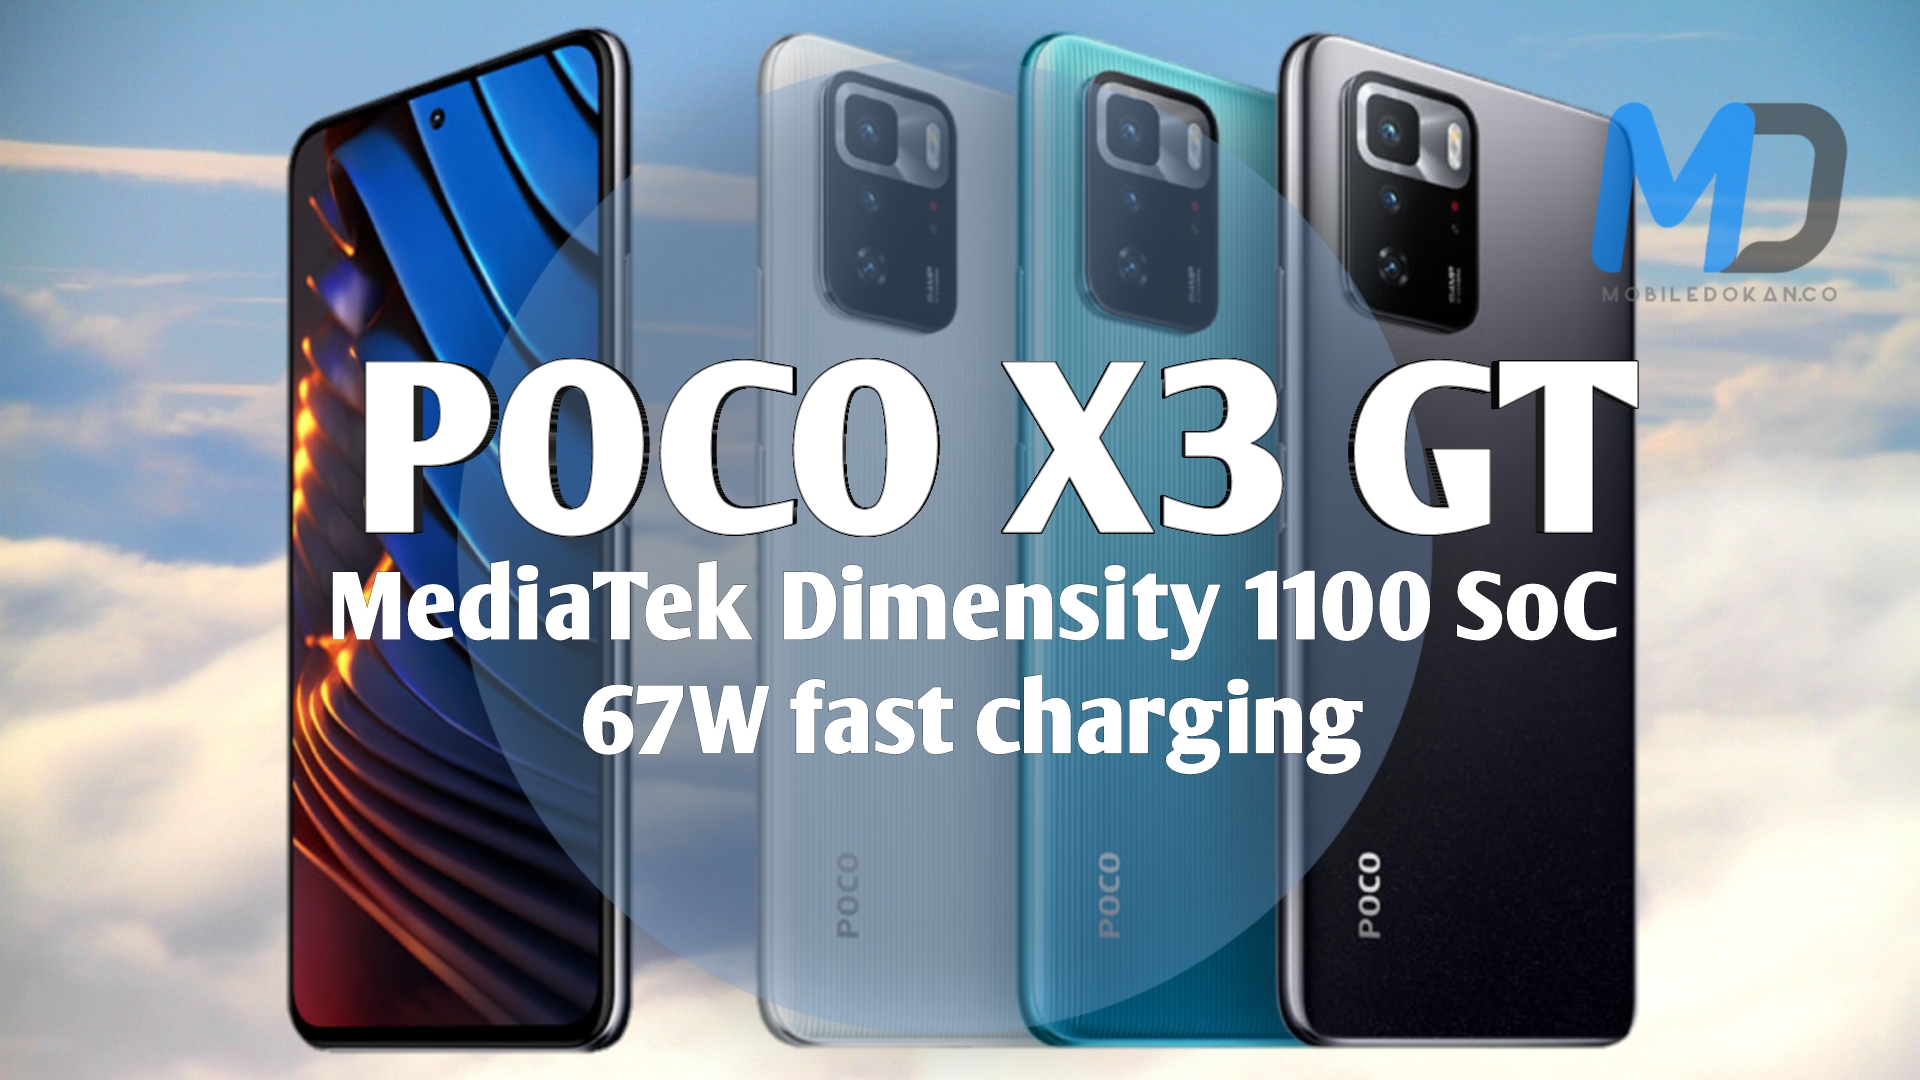 POCO X3 GT ahead to launch with MediaTek Dimensity 1100 SoC and 67W fast charging